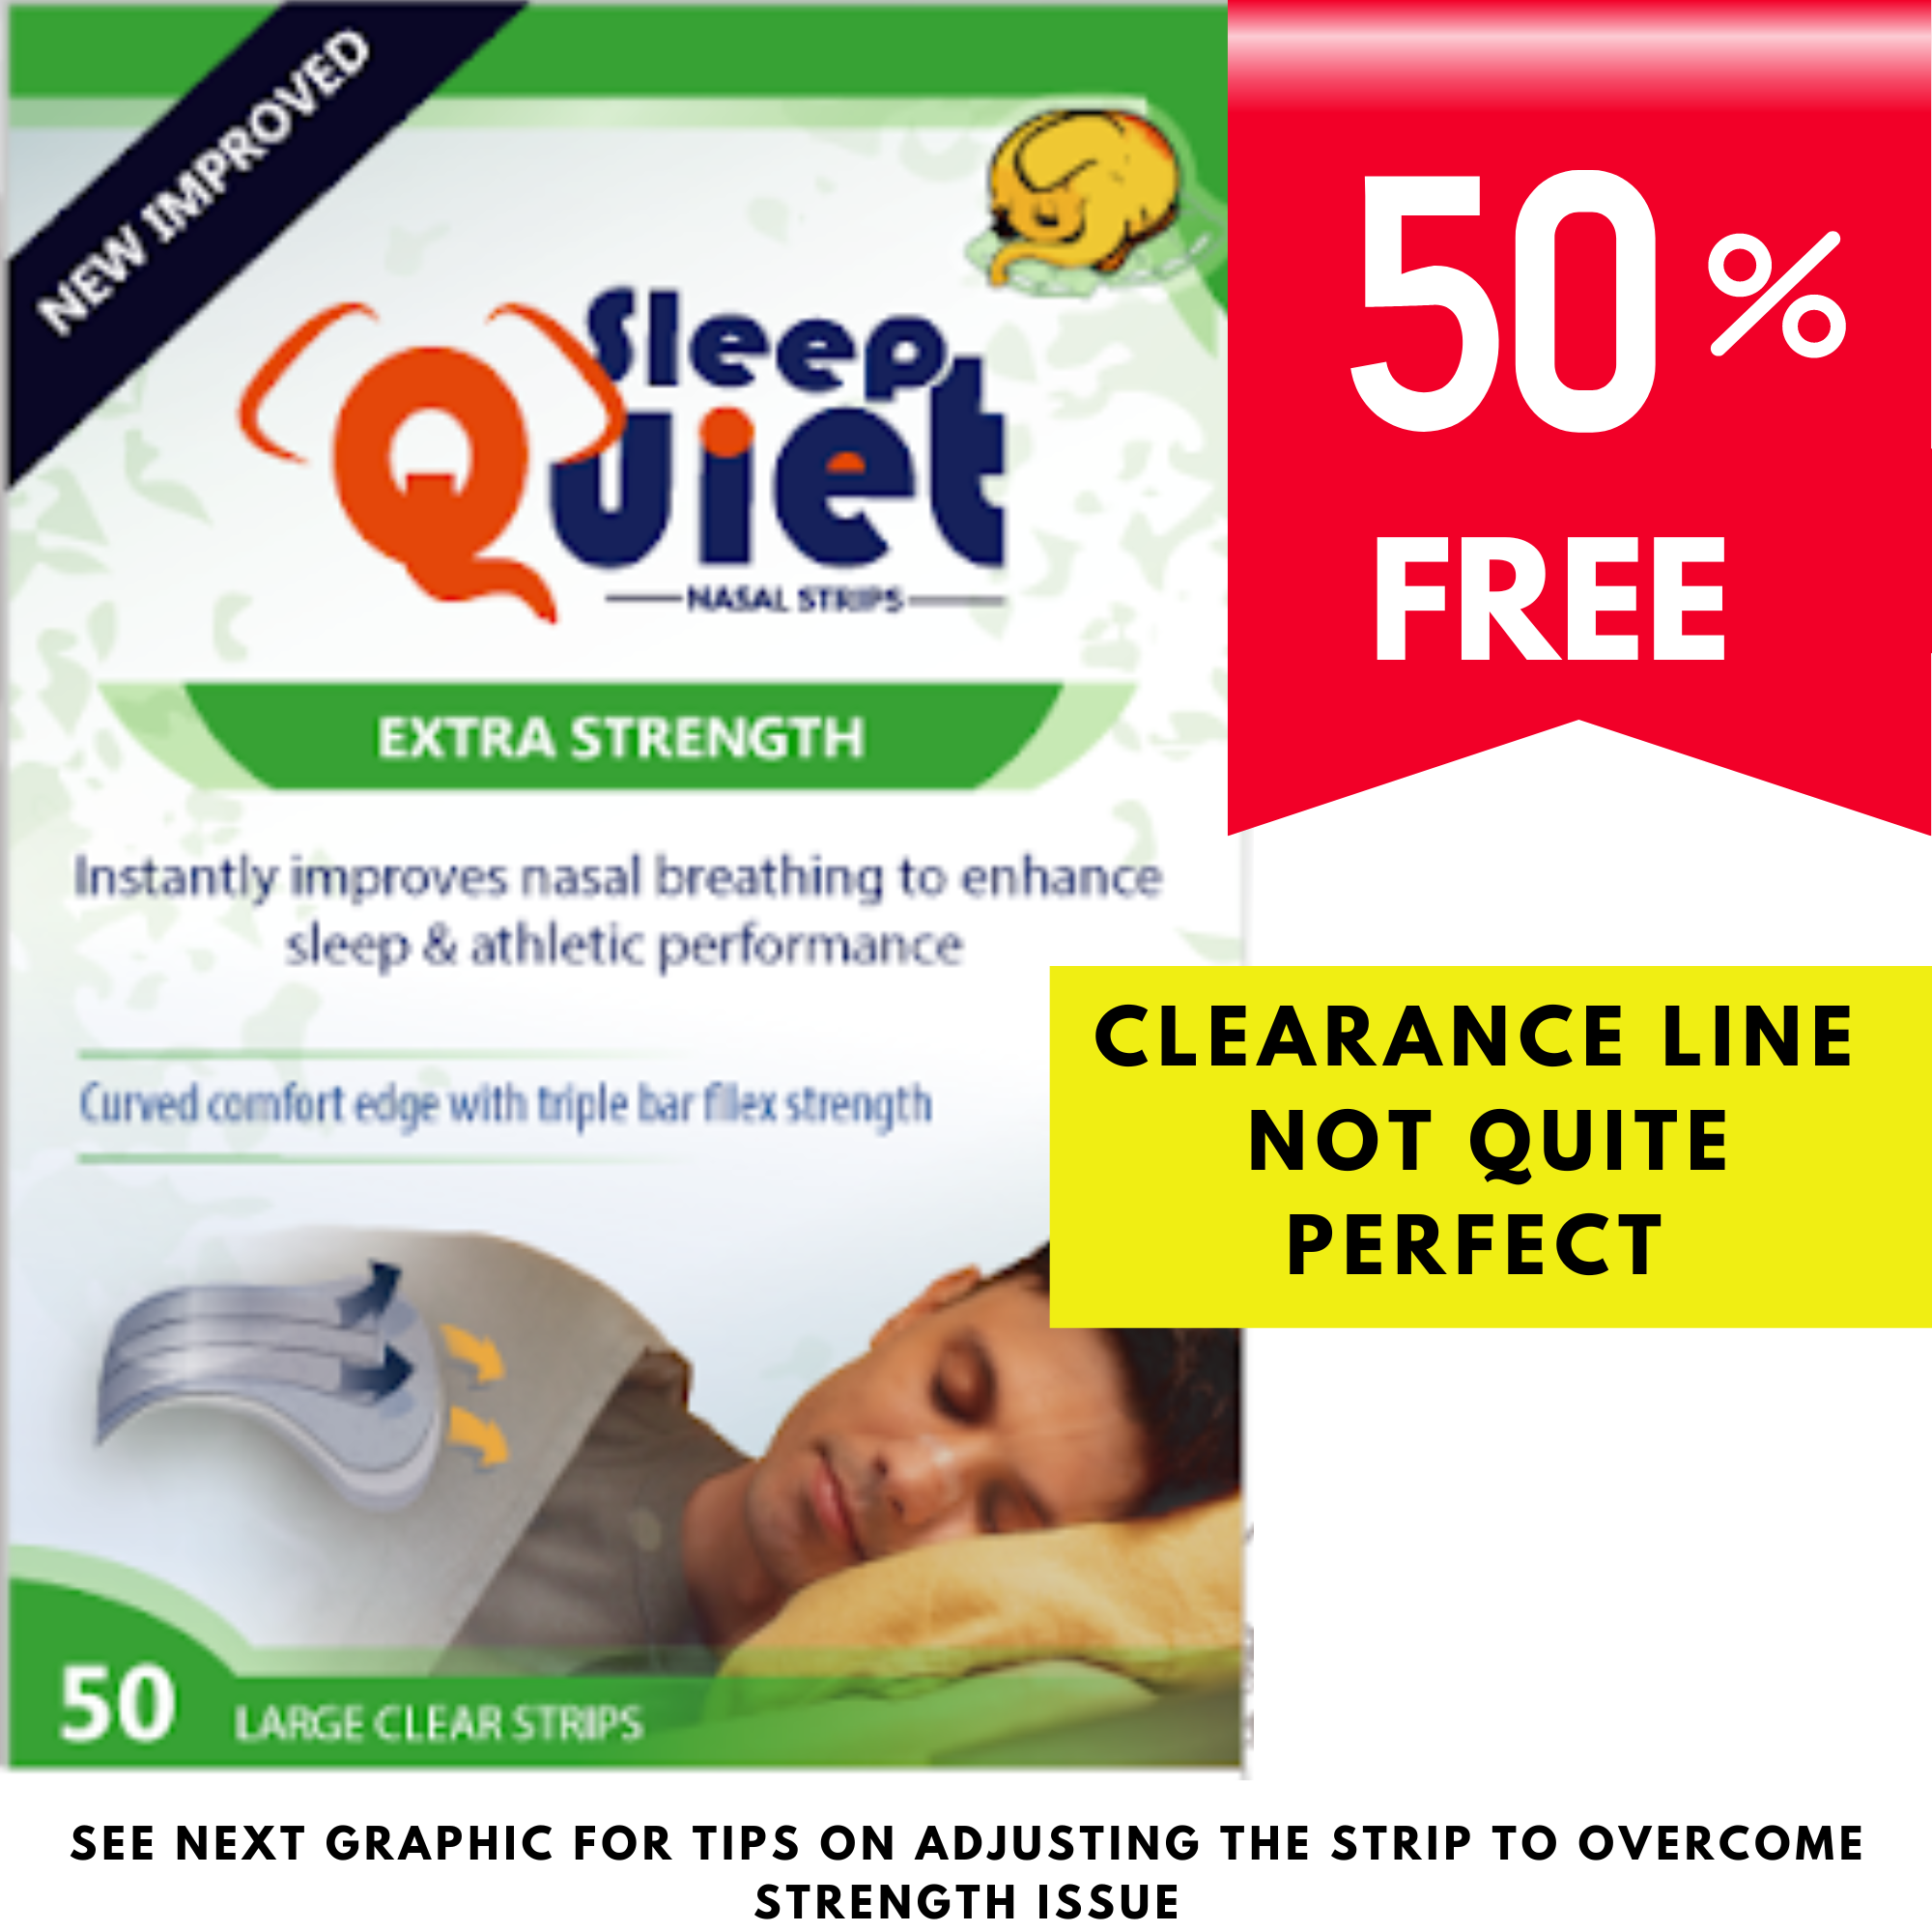 50% Free Clearance Deal Sleep Quiet Faulty Clear Extra Strength Large Nasal Strip